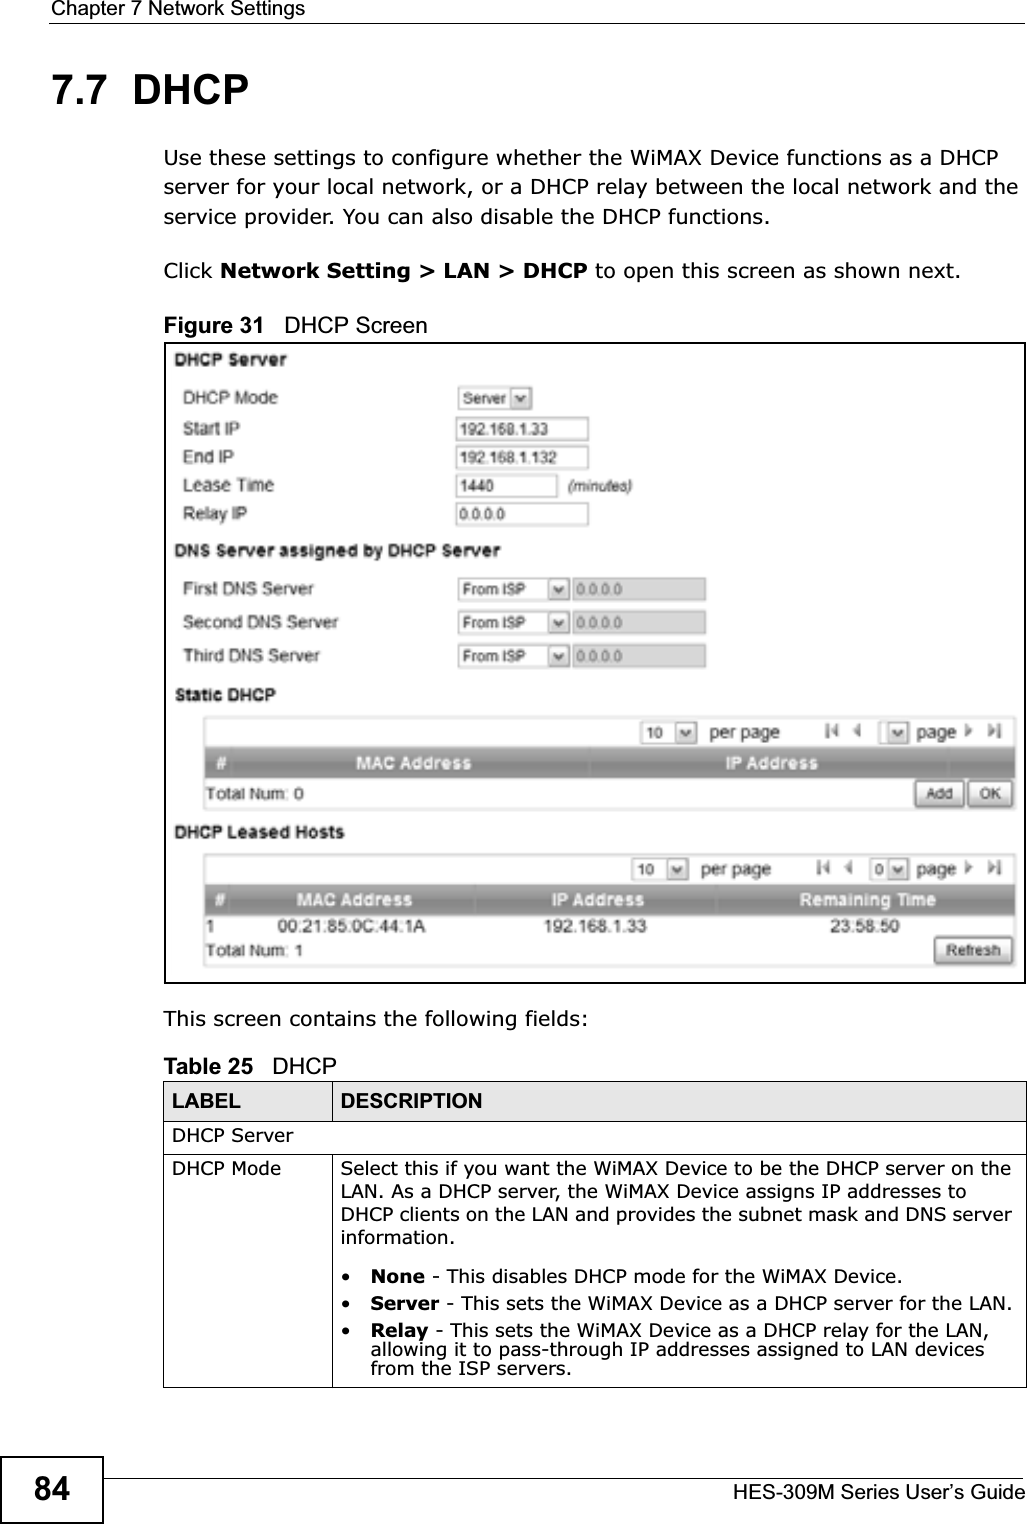 Chapter 7 Network SettingsHES-309M Series User’s Guide847.7  DHCPUse these settings to configure whether the WiMAX Device functions as a DHCP server for your local network, or a DHCP relay between the local network and the service provider. You can also disable the DHCP functions.Click Network Setting &gt; LAN &gt; DHCP to open this screen as shown next.Figure 31   DHCP ScreenThis screen contains the following fields:Table 25   DHCPLABEL DESCRIPTIONDHCP ServerDHCP Mode Select this if you want the WiMAX Device to be the DHCP server on the LAN. As a DHCP server, the WiMAX Device assigns IP addresses to DHCP clients on the LAN and provides the subnet mask and DNS server information.•None - This disables DHCP mode for the WiMAX Device.•Server - This sets the WiMAX Device as a DHCP server for the LAN.•Relay - This sets the WiMAX Device as a DHCP relay for the LAN, allowing it to pass-through IP addresses assigned to LAN devices from the ISP servers.